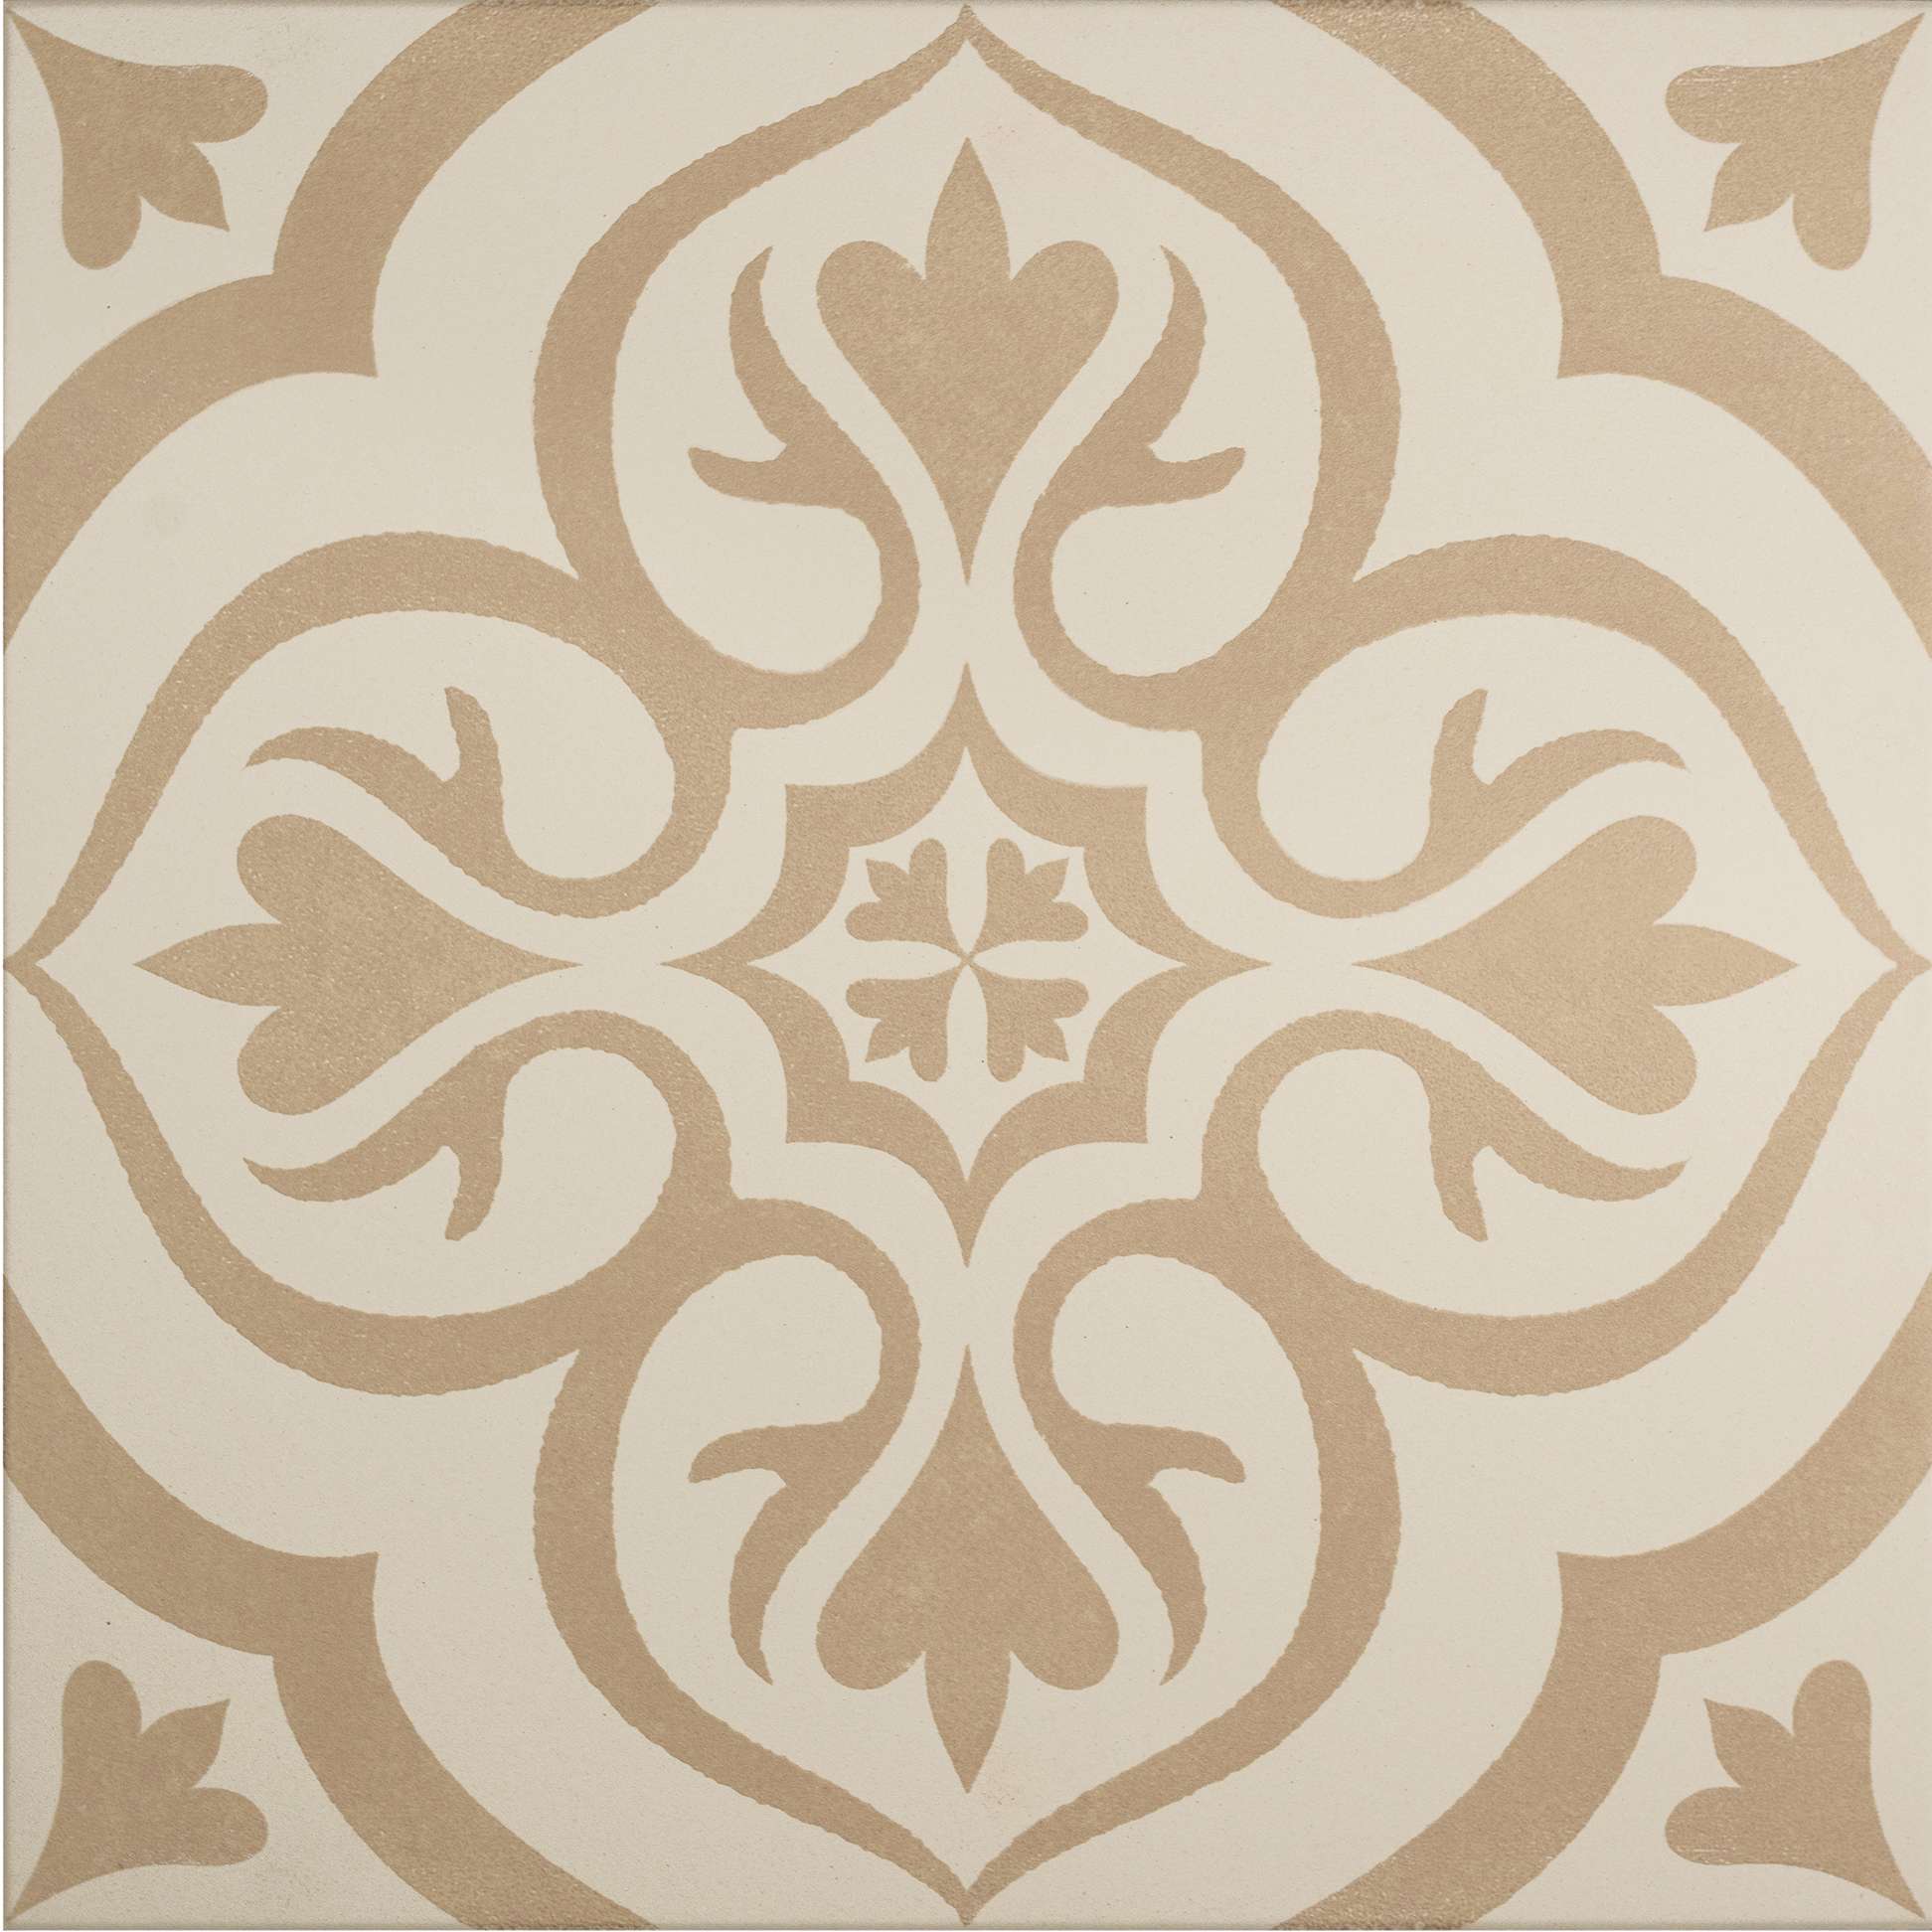 Original Style Odyssey Grande Knightshayes Taupe on Chalk Tile 30x30cm